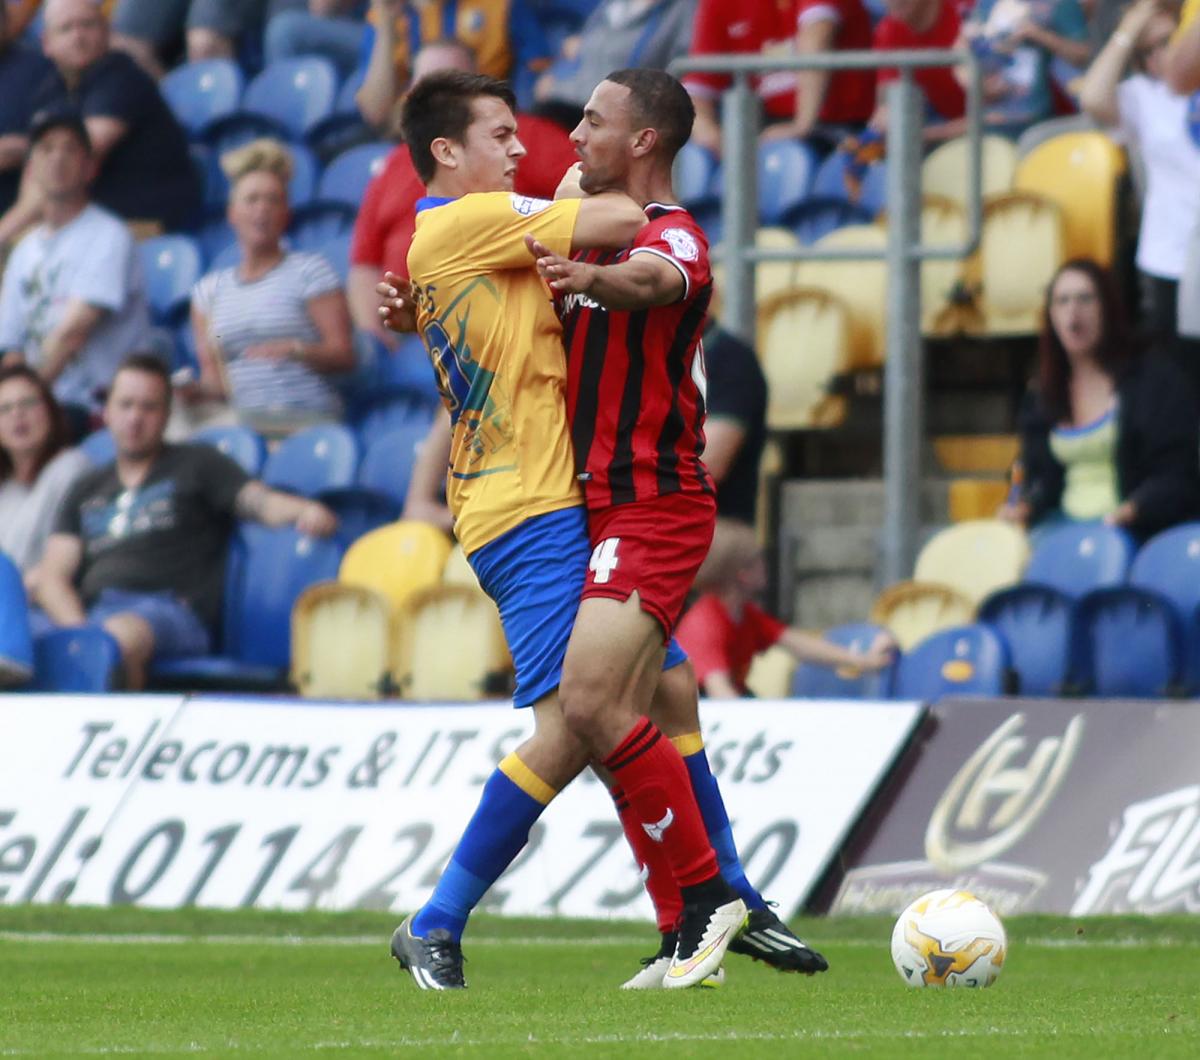 Pictures from Oxford's 1-1 draw away to Mansfield Town, Oxford came back from behind to keep their unbeaten run alive. 